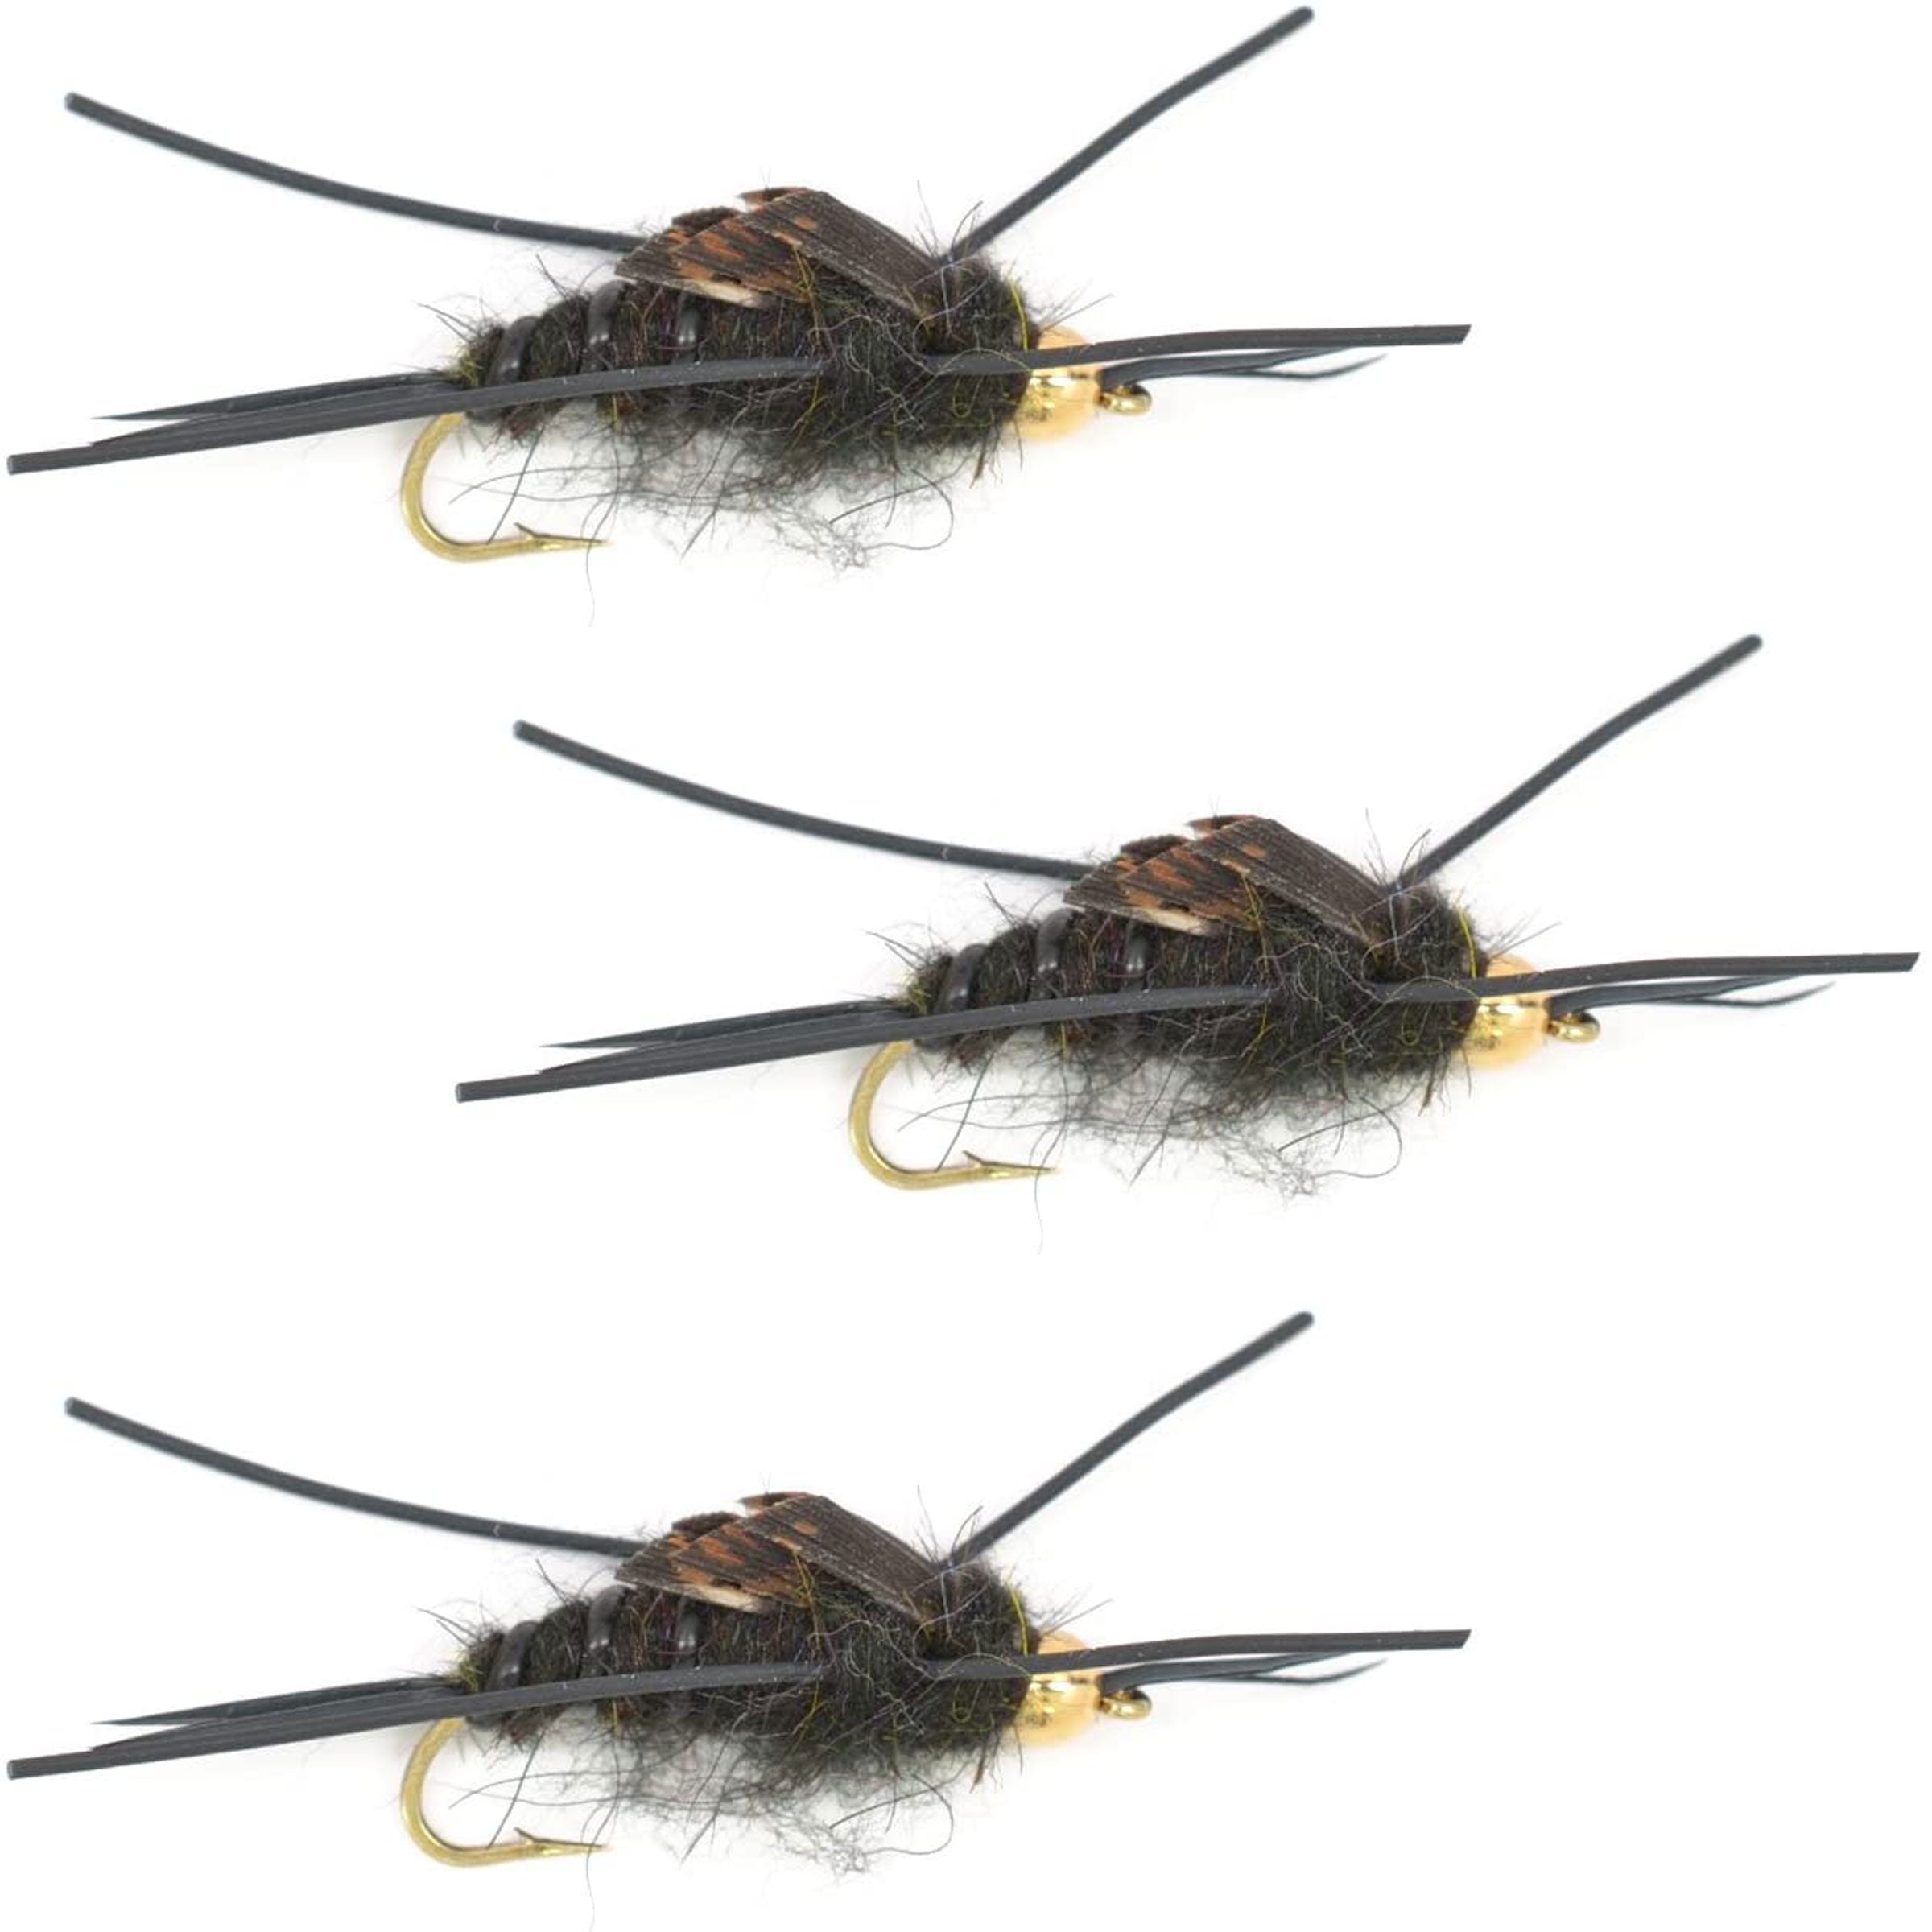 3 Pack Tungsten Bead Kaufmann's Black Stone Fly with Rubber Legs - Stonefly Wet Fly - Hook Size 4